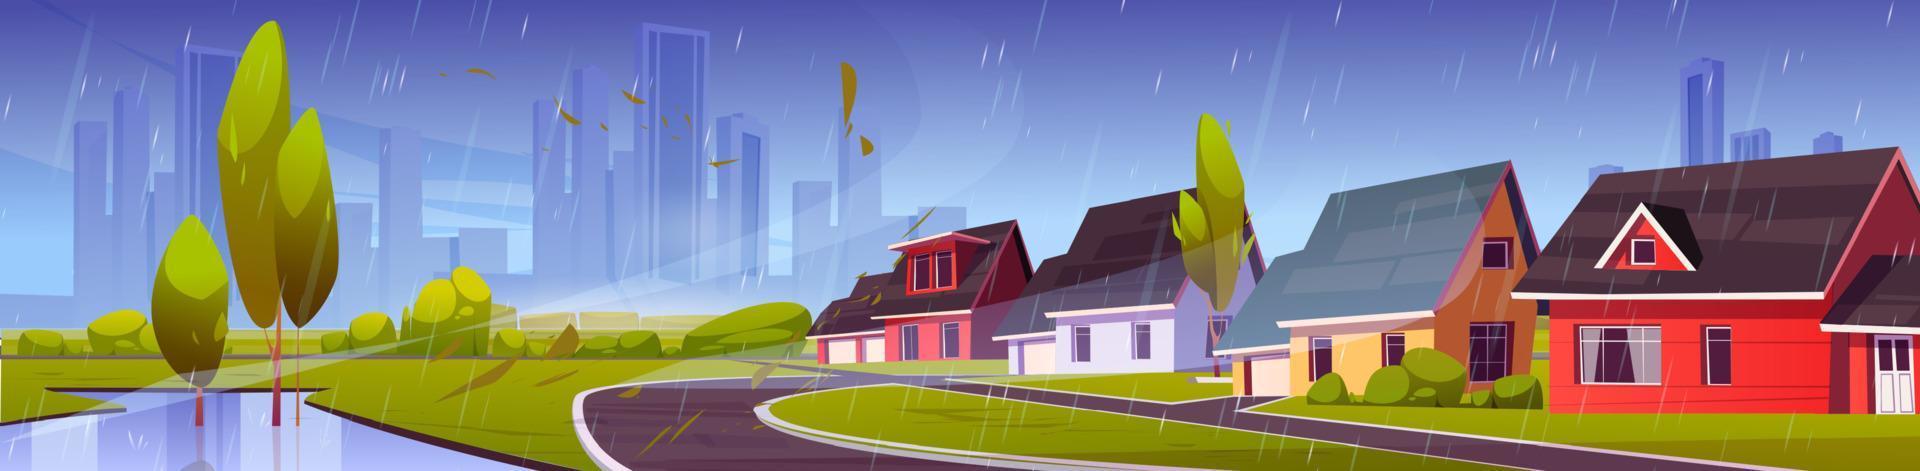 Suburb district with houses in rain vector